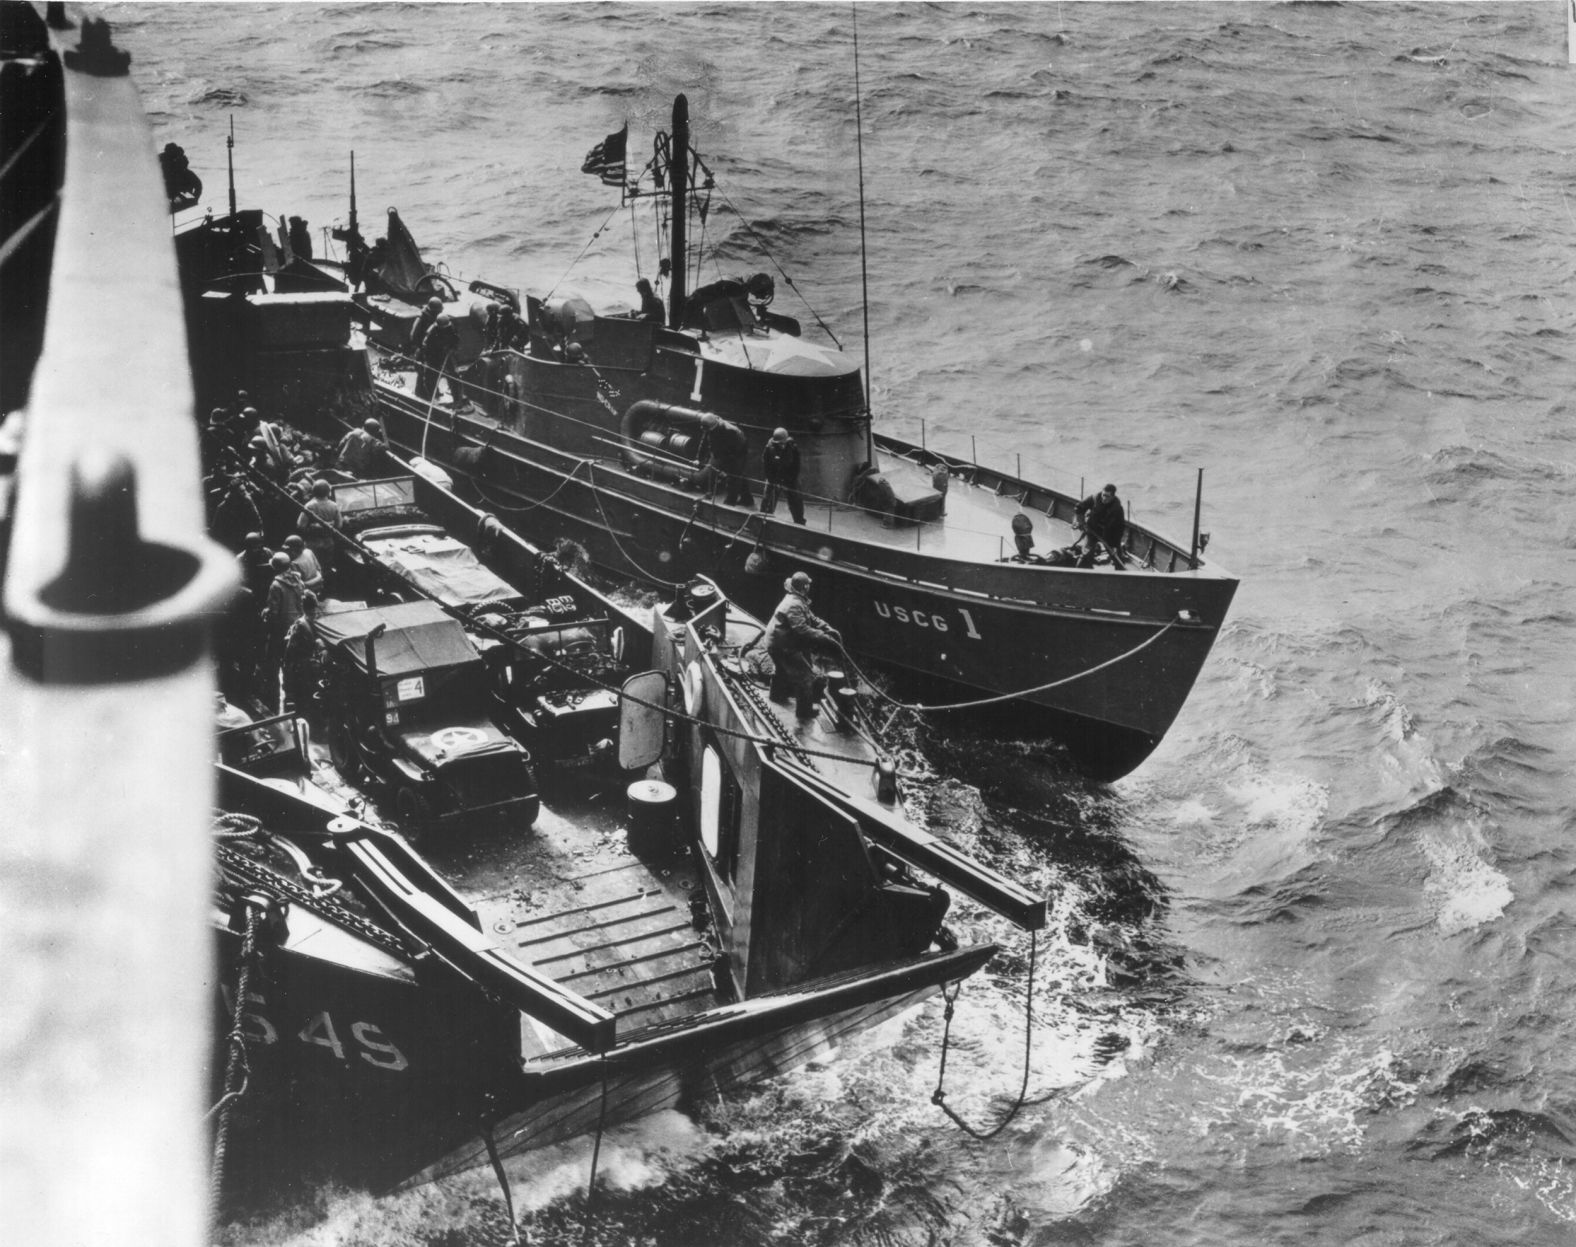 US Coast Guard boats are seen off Omaha Beach on the morning of D-Day. Troops left the USS Samuel Chase early that day to head to Normandy. "When the order 'Lower Away' came, everything was quiet," Sargent recalled. "Just the squeaking of the davits and the whispered comments of the men were heard. The soldiers were silent."